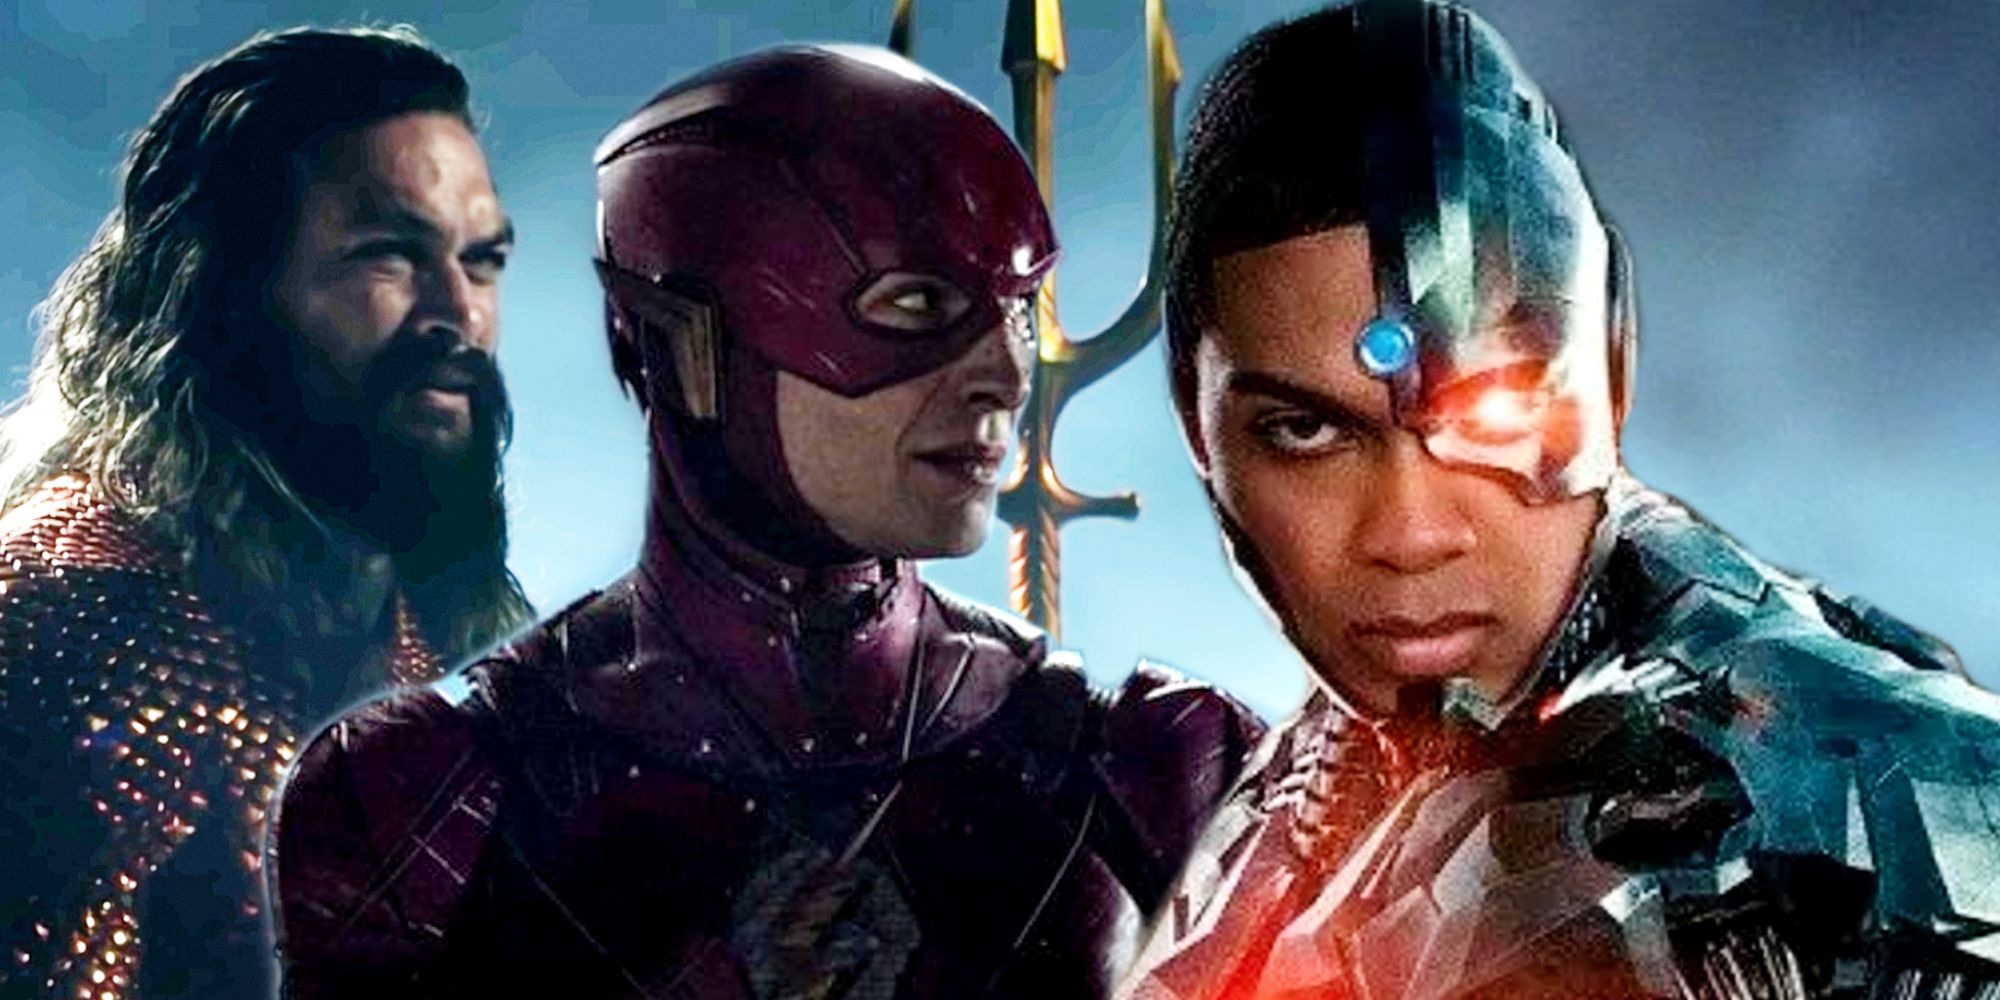 Cyborg, Flash, and Aquaman in the Justice League Peacemaker Cameo